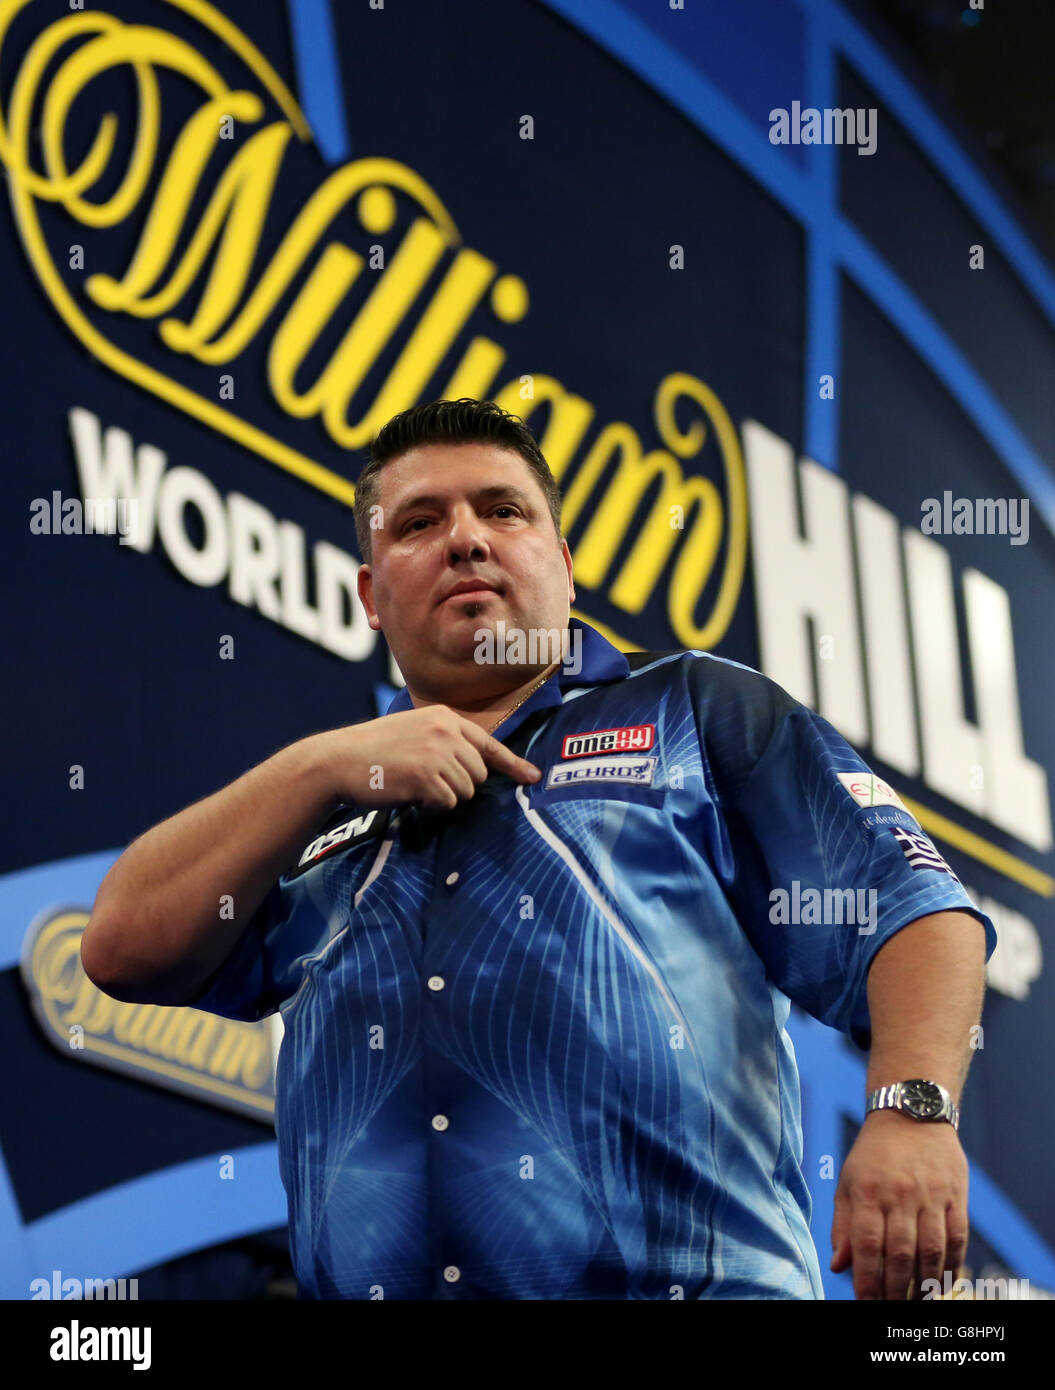 John Michael reacts during his match with Warrick Scheffer during day five of the William Hill PDC World Championship at Alexandra Palace, London. PRESS ASSOCIATION Photo. Picture date: Monday December 21, 2015. See PA story DARTS World. Photo credit should read: Simon Cooper/PA Wire. Use subject to restrictions. No commercial use. Stock Photo